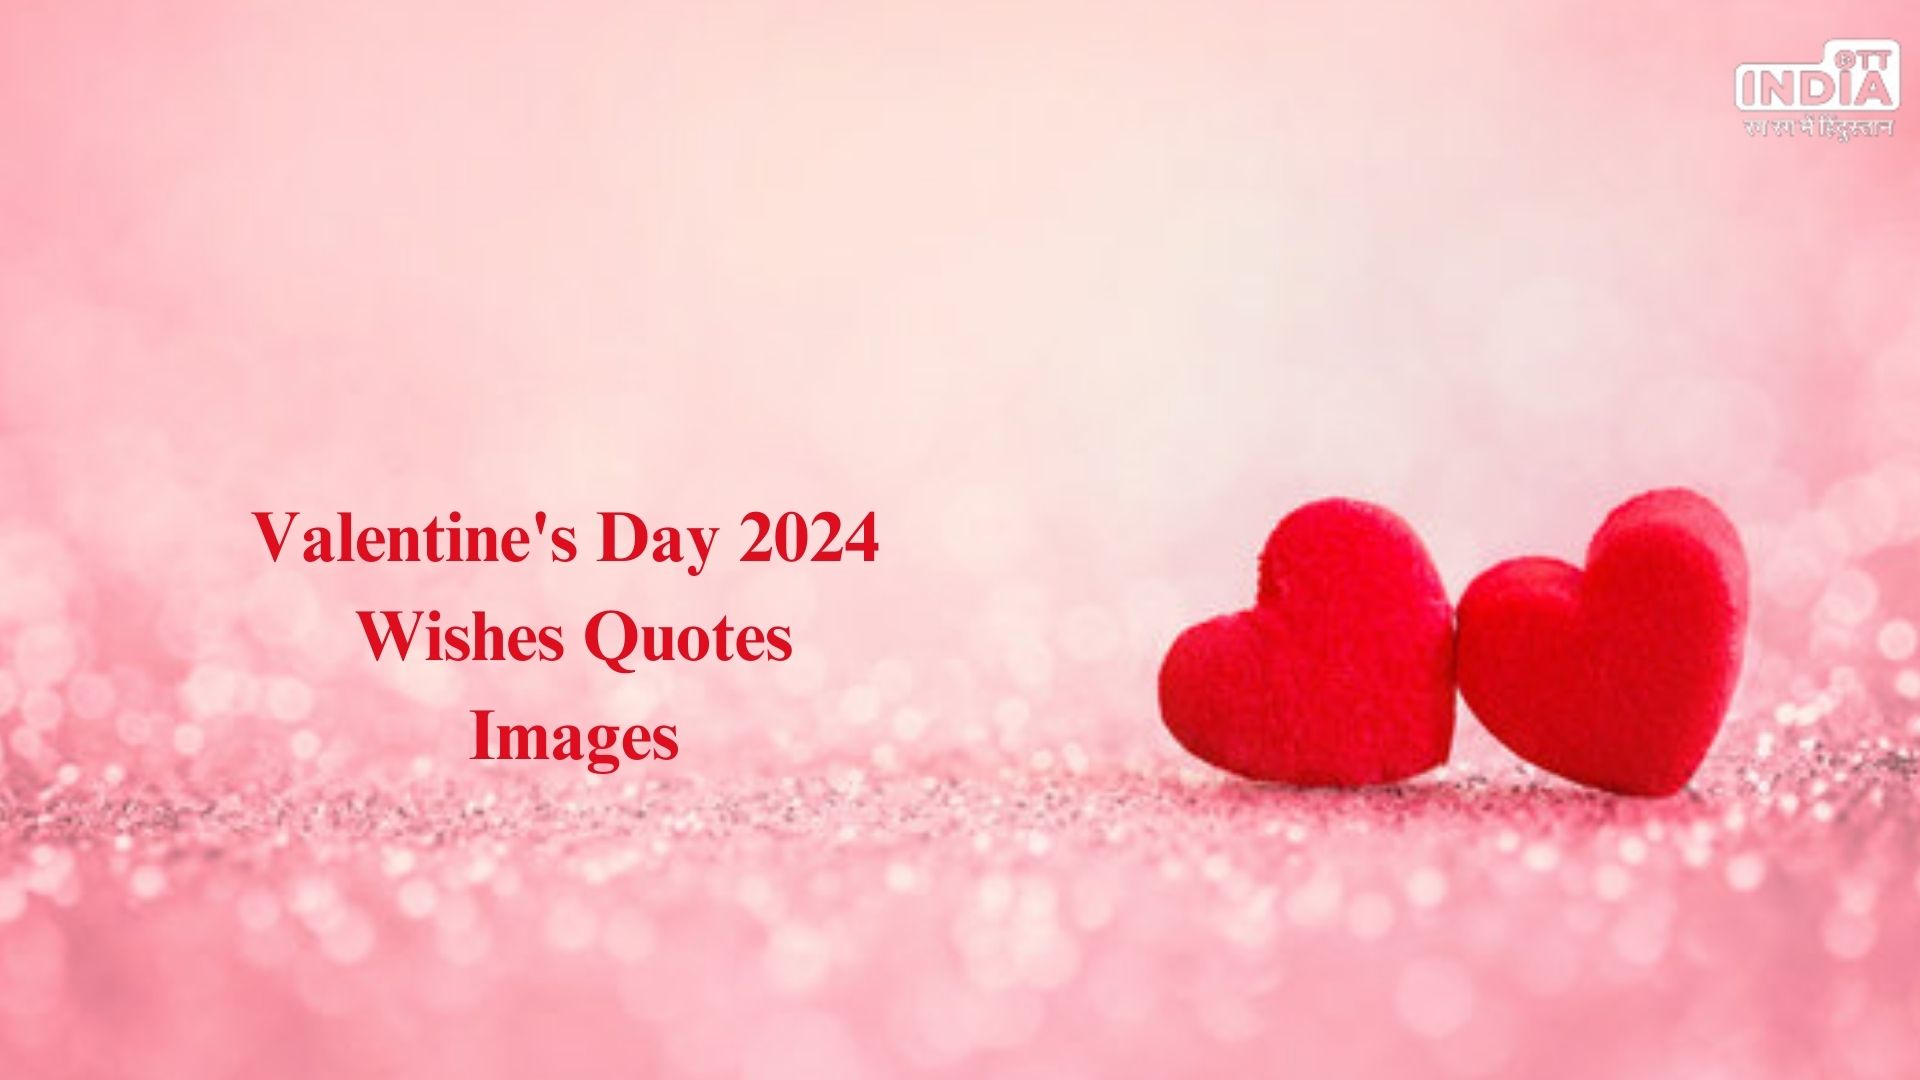 Valentine's Day 2024 Wishes Quotes Images: